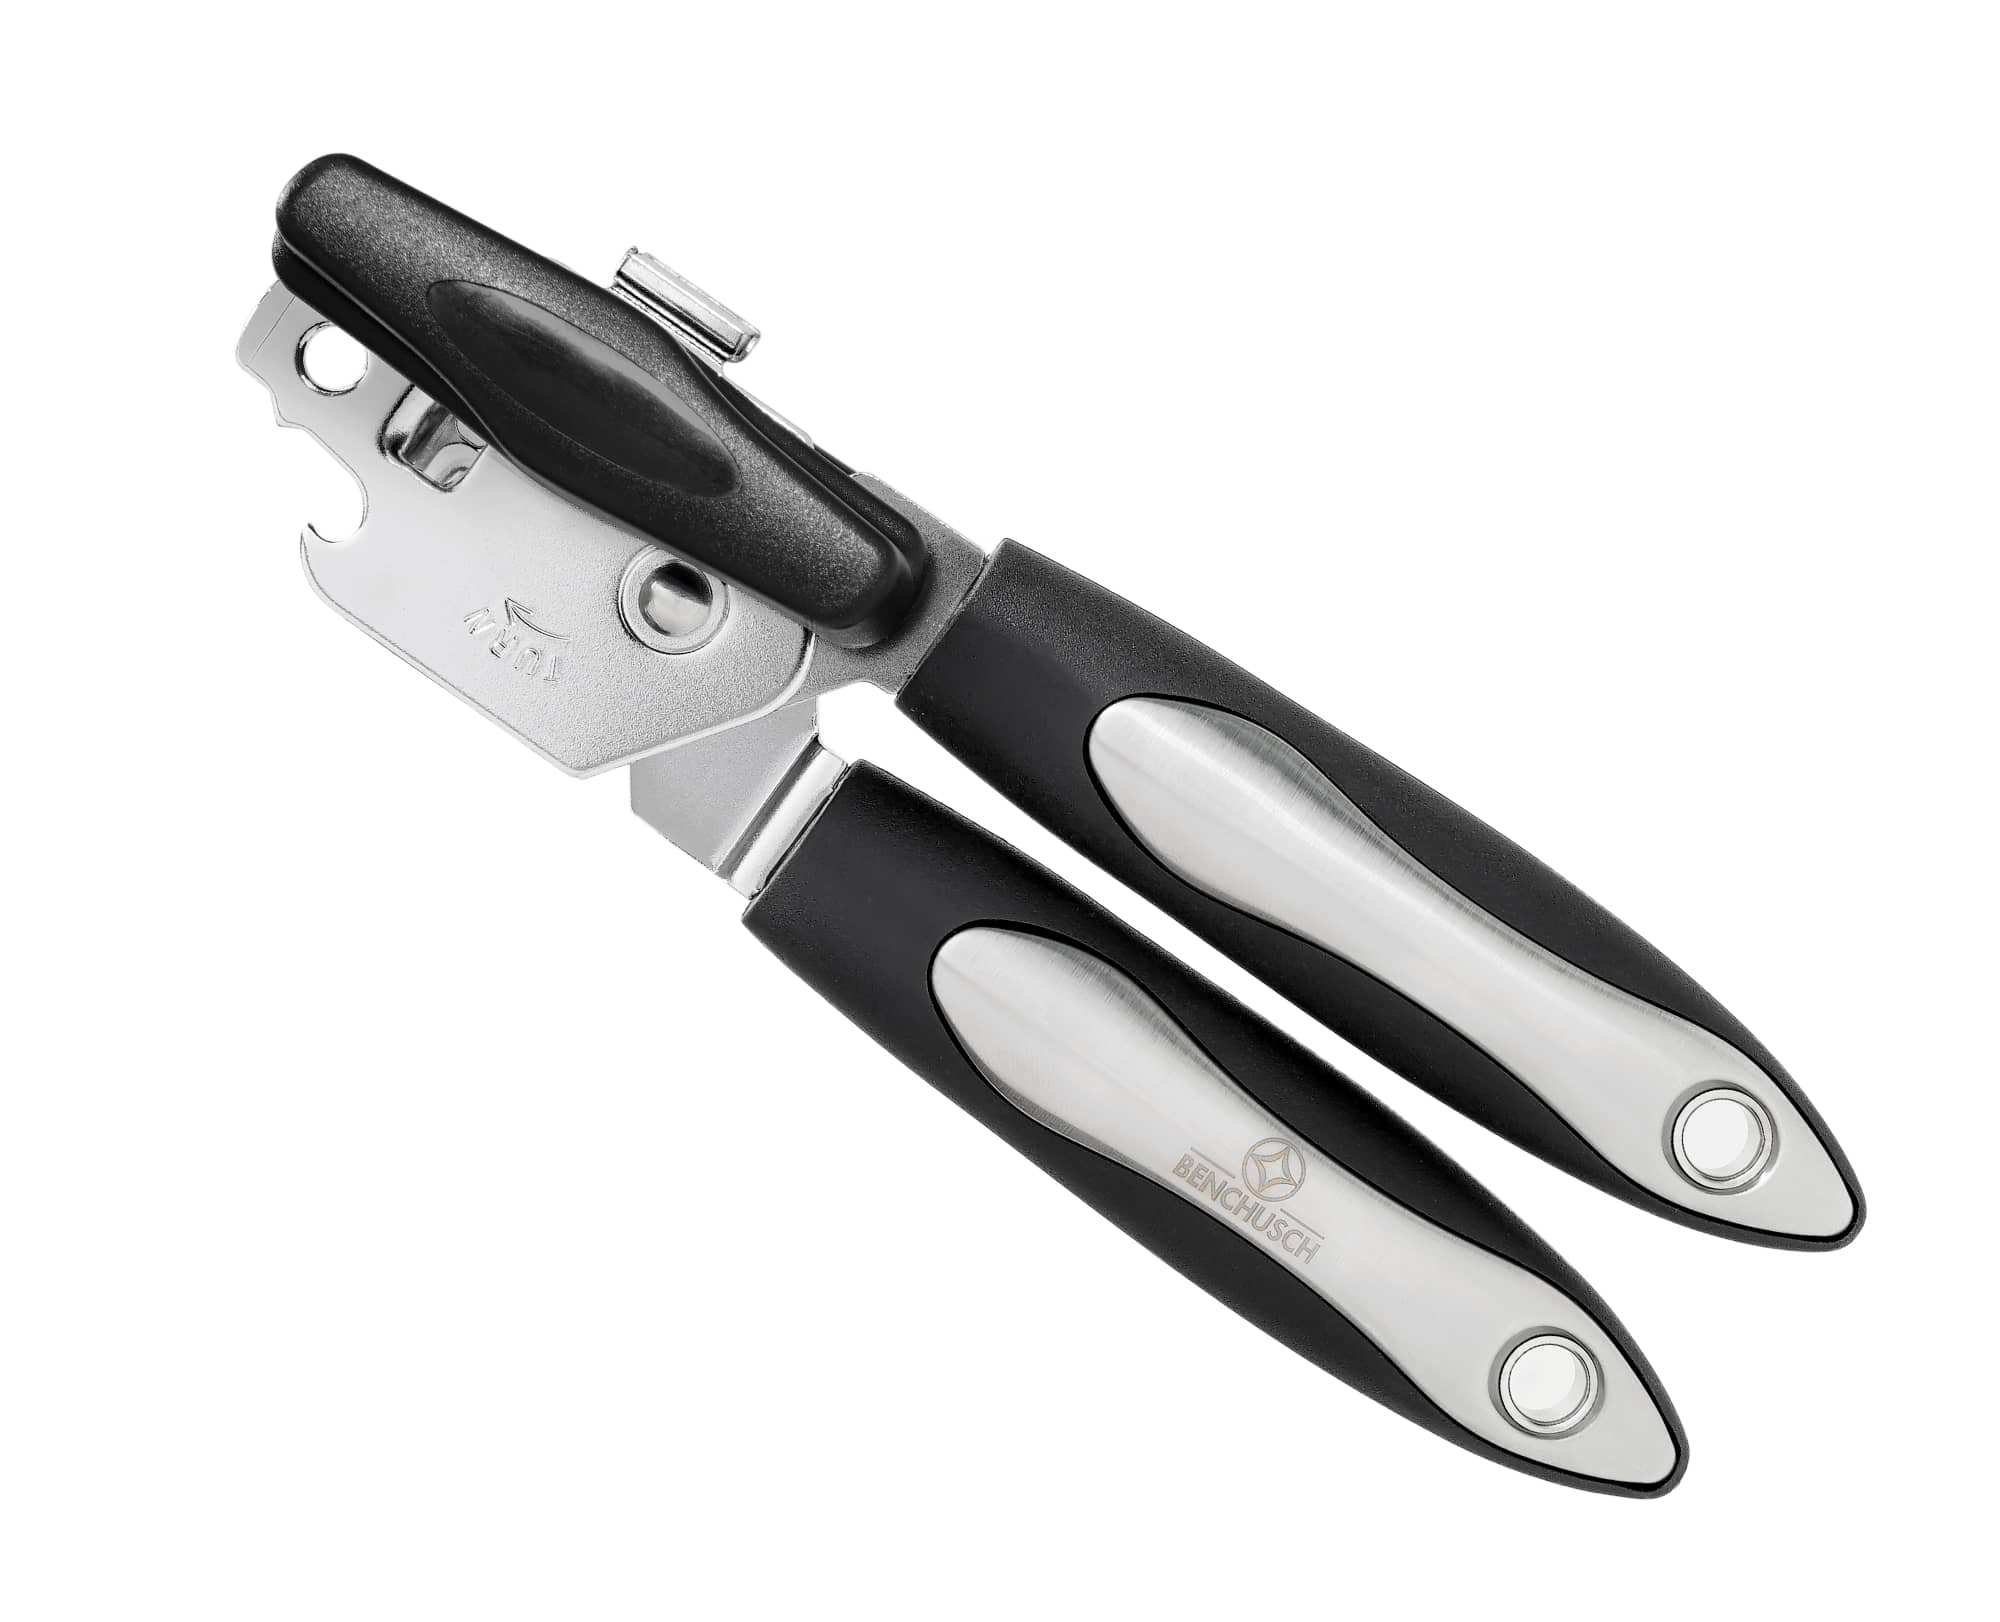 Benchusch Black Magnet Classia Can Opener with Magnet Built-in, Stainless Steel Cutting Wheel